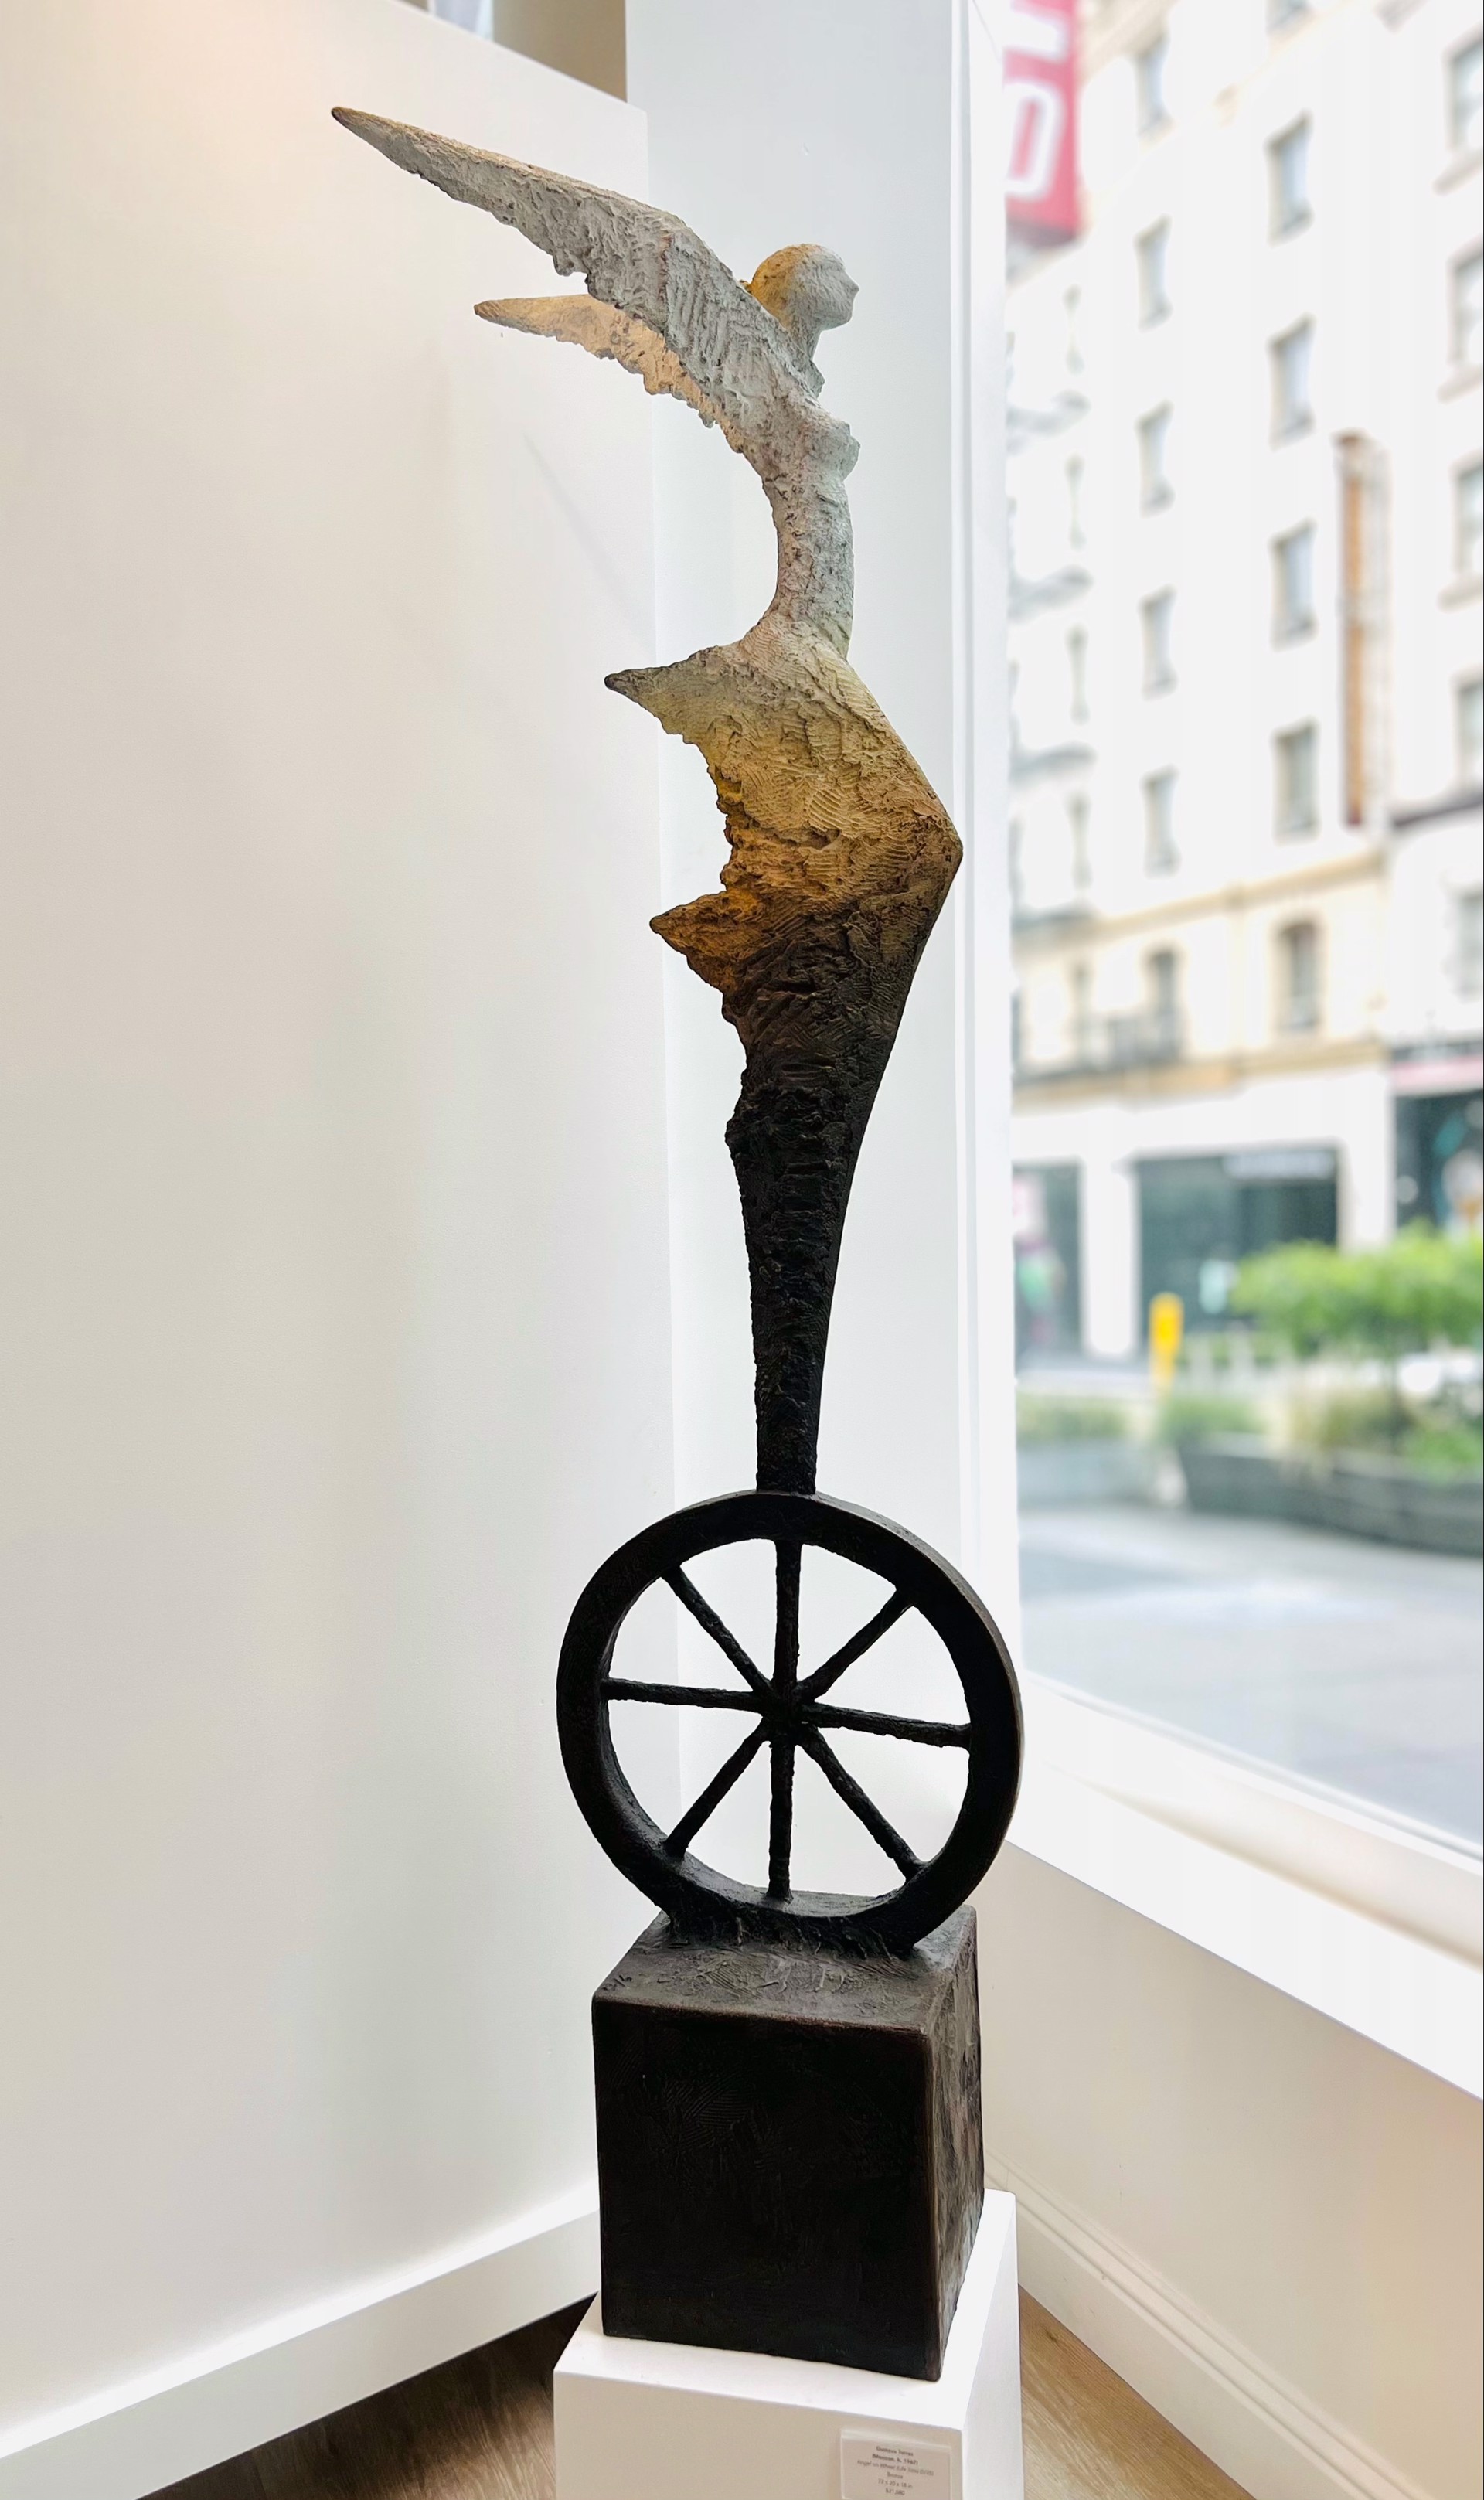 Angel on Wheel (Life Size) by Gustavo Torres